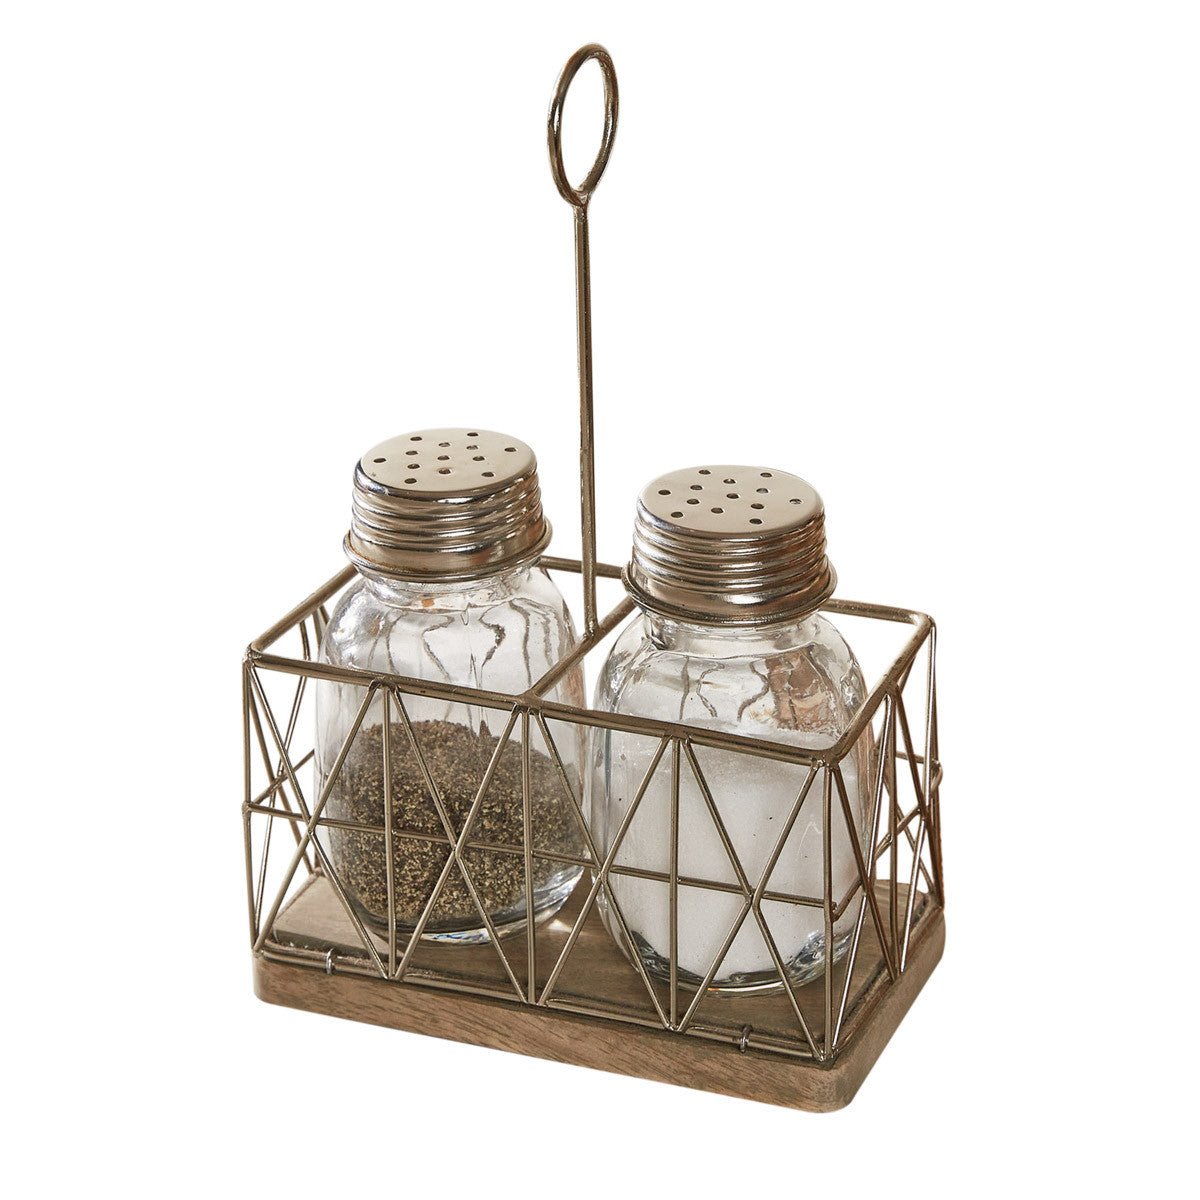 Salt+and+Pepper+Caddy+With+Ring+Galvanized+Metal+Weave+Includes+Shakers for  sale online